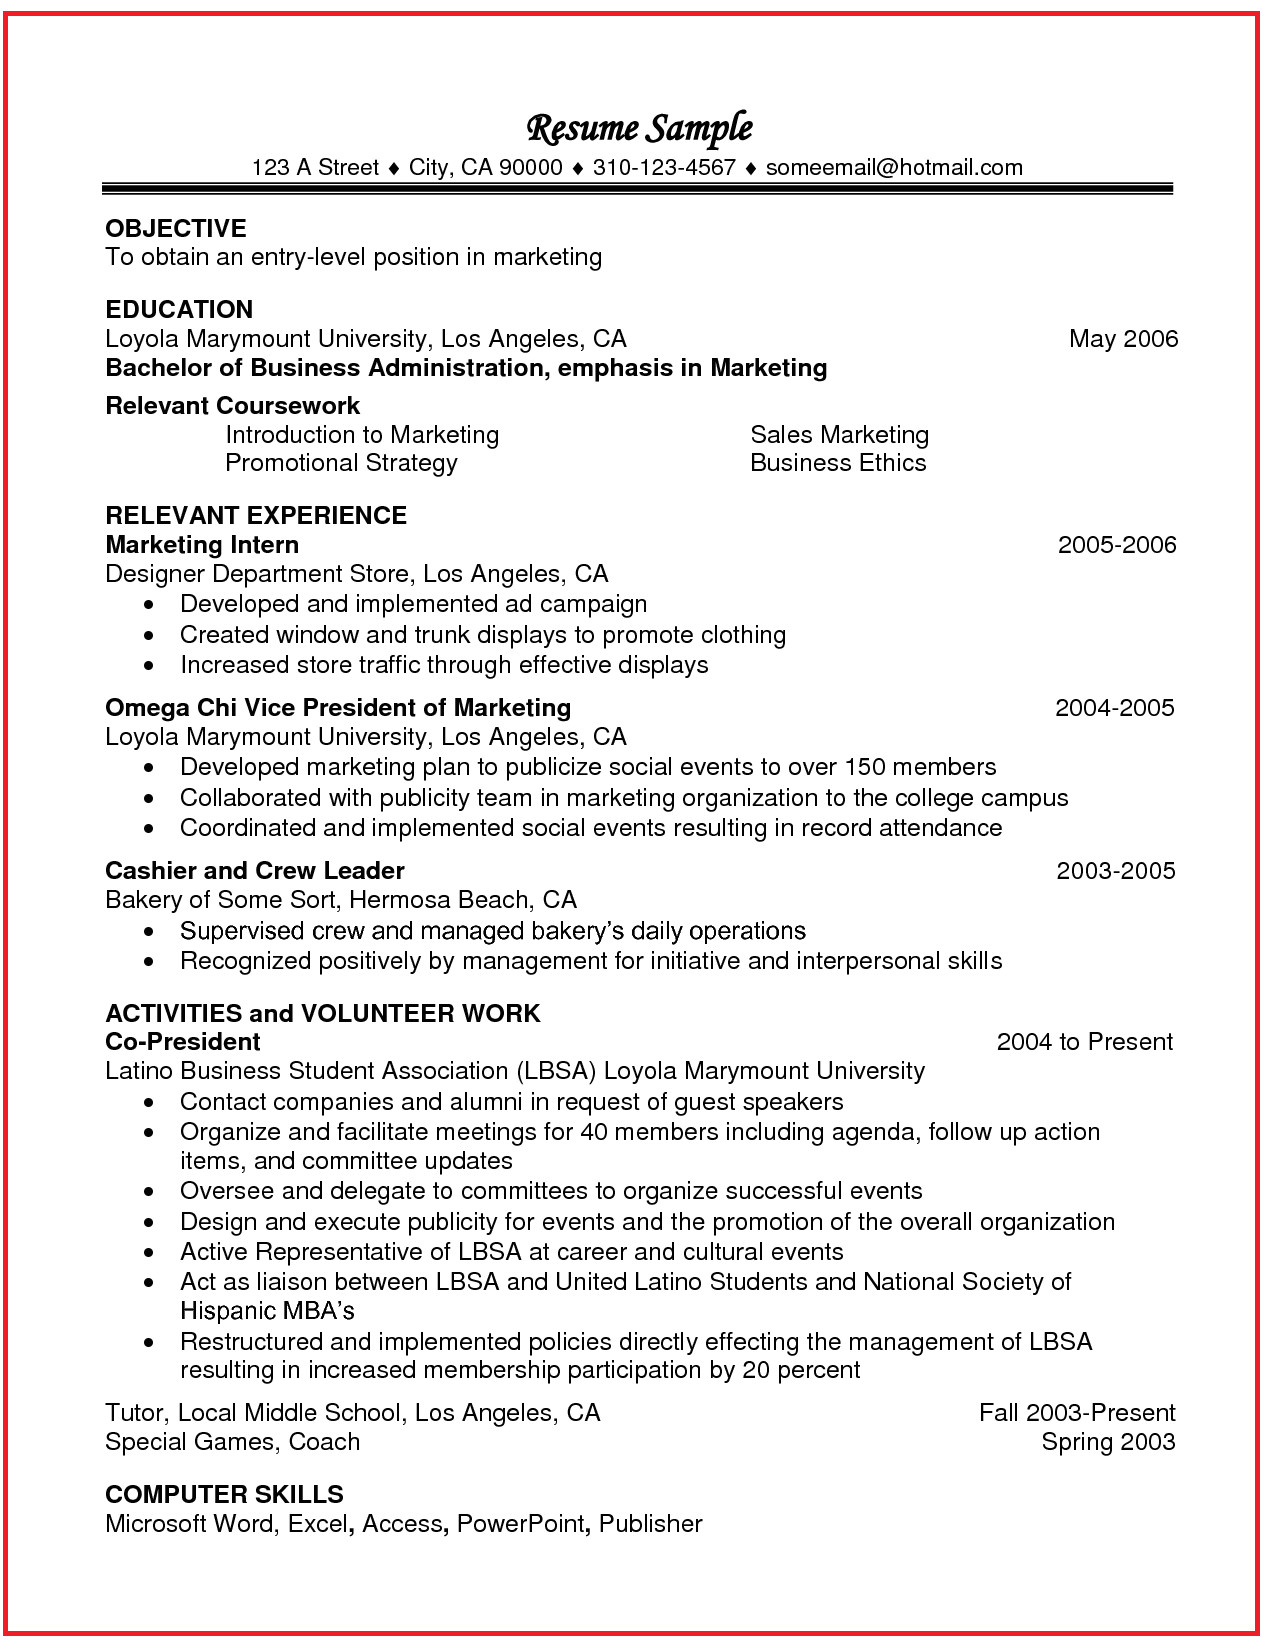 Student Resume Relevant Coursework Pin by Resumejob On Resume Job Resume Words Resume